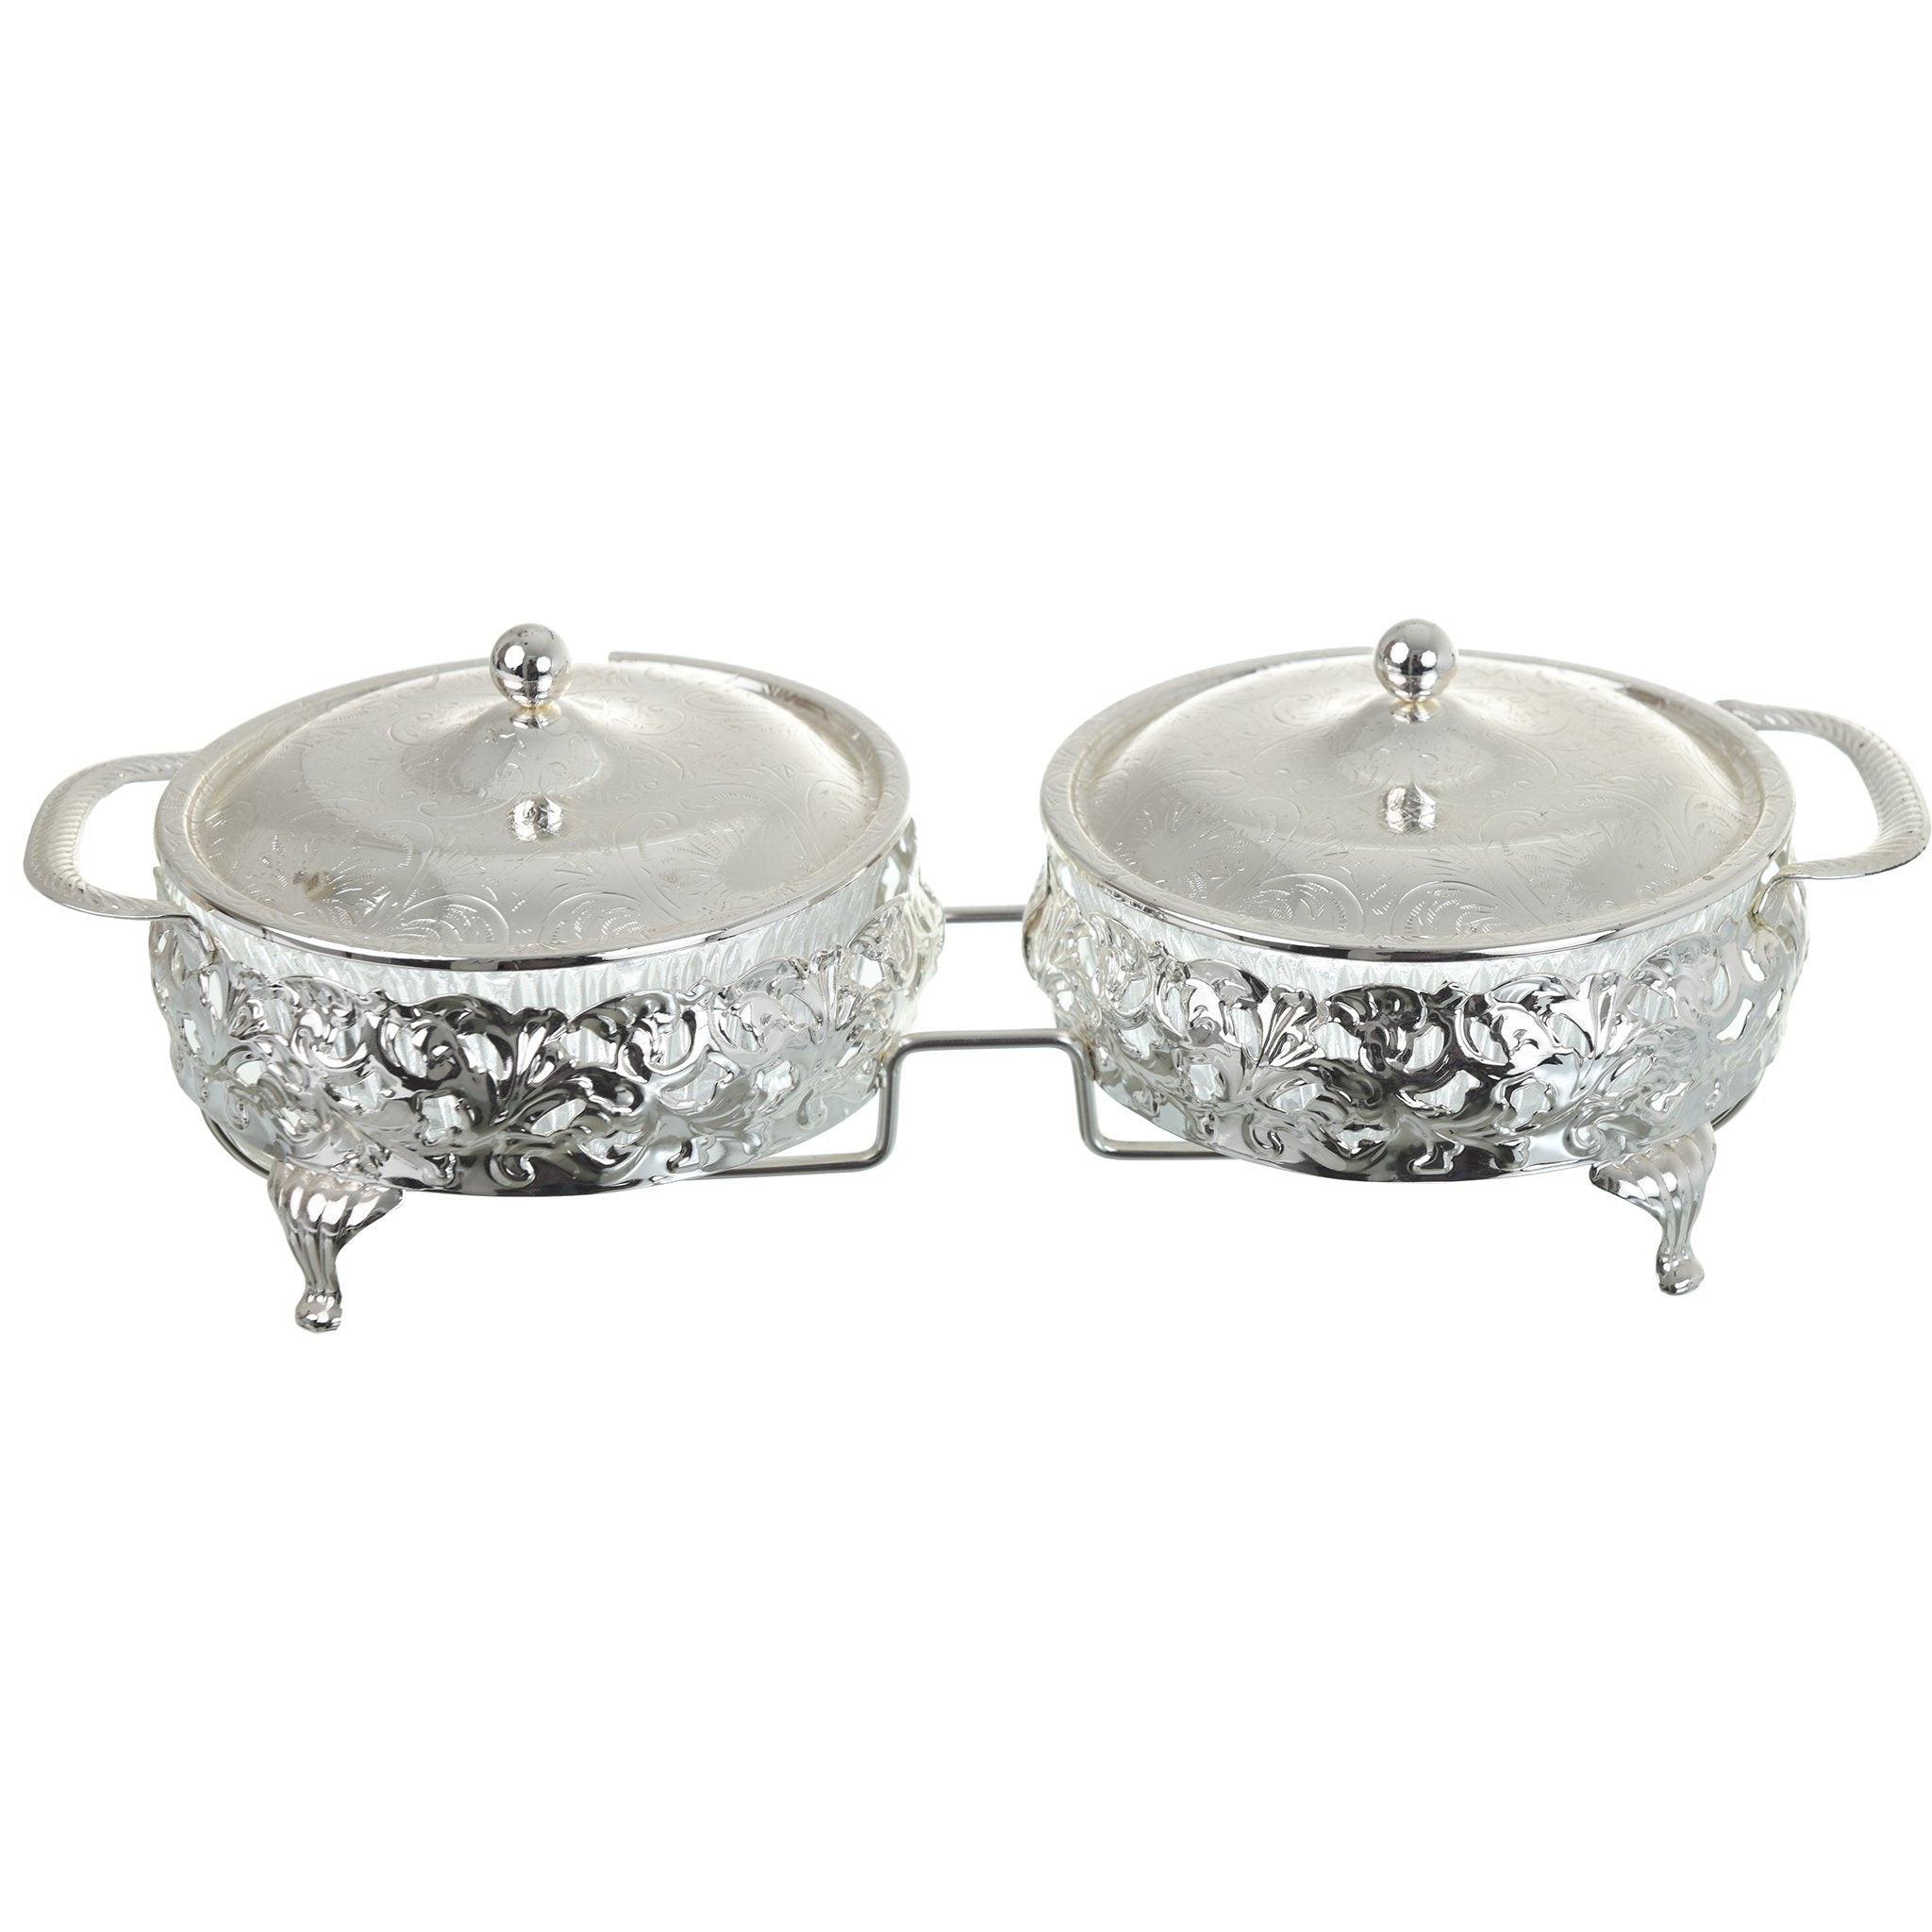 Queen Anne - Jam Bowl Set with Silver Plated Stand & Covers 2 Pieces - Silver Plated Metal & Glass - 26x12cm - 26000454